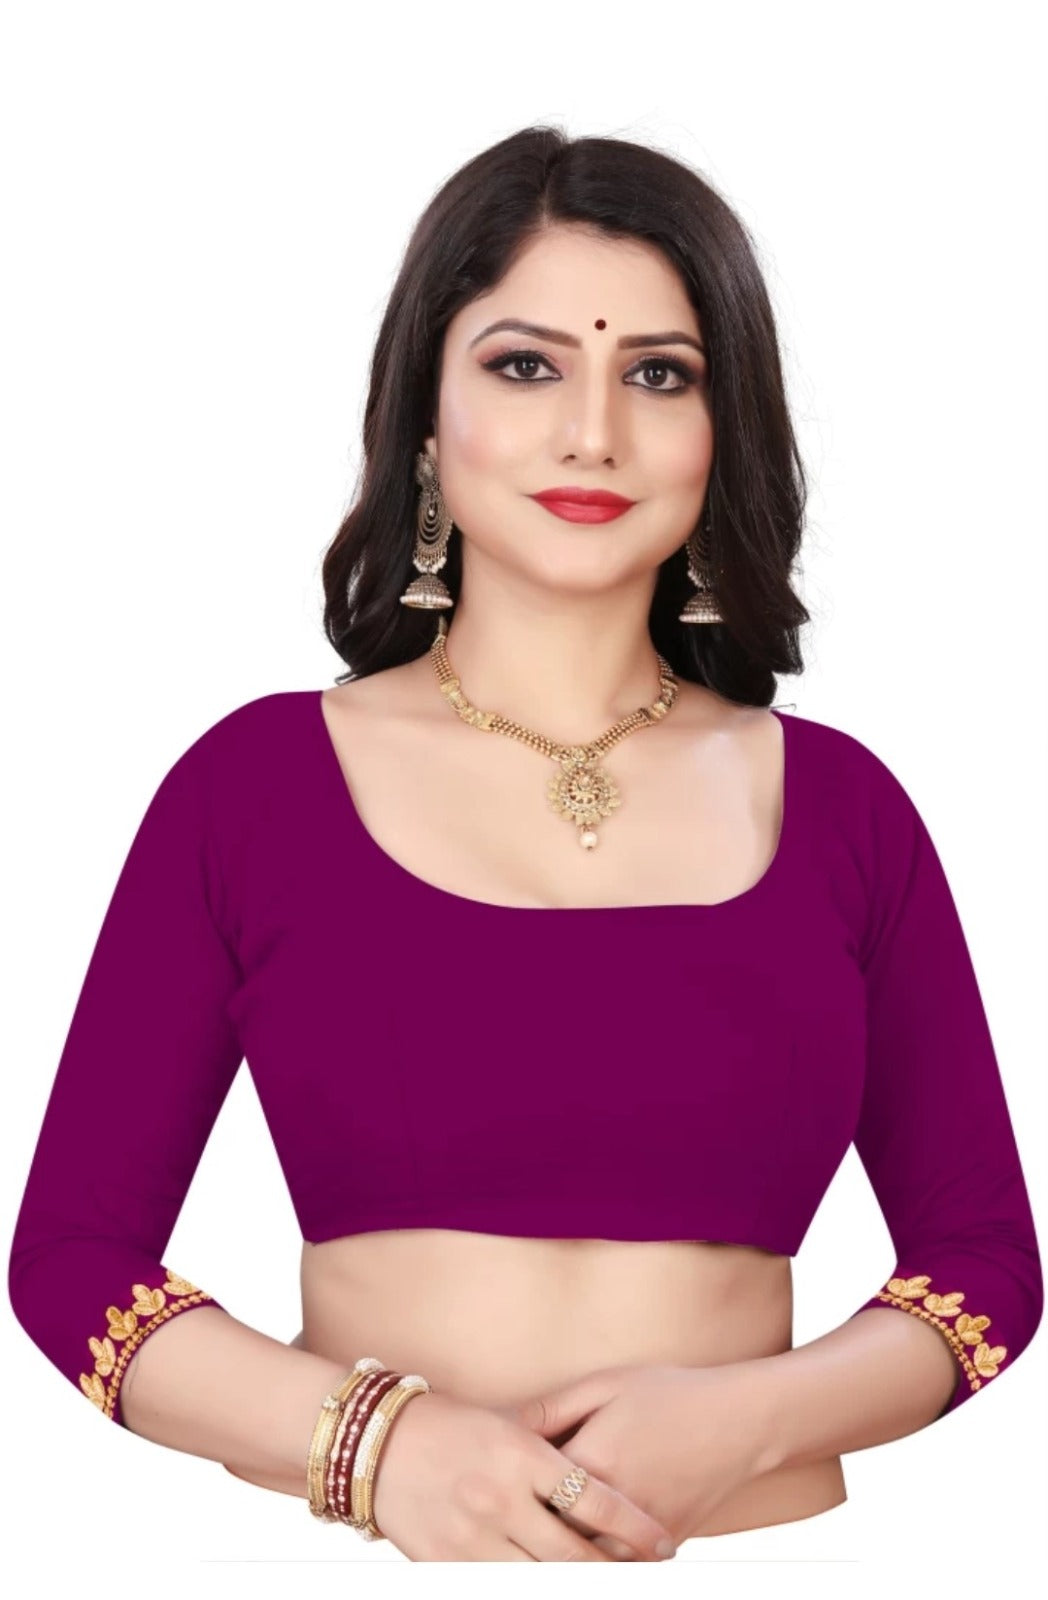 Women's Embroider Border with Placement Mirror Work Lycra Blend Saree With Blouse Piece (Purple) - NIMIDHYA